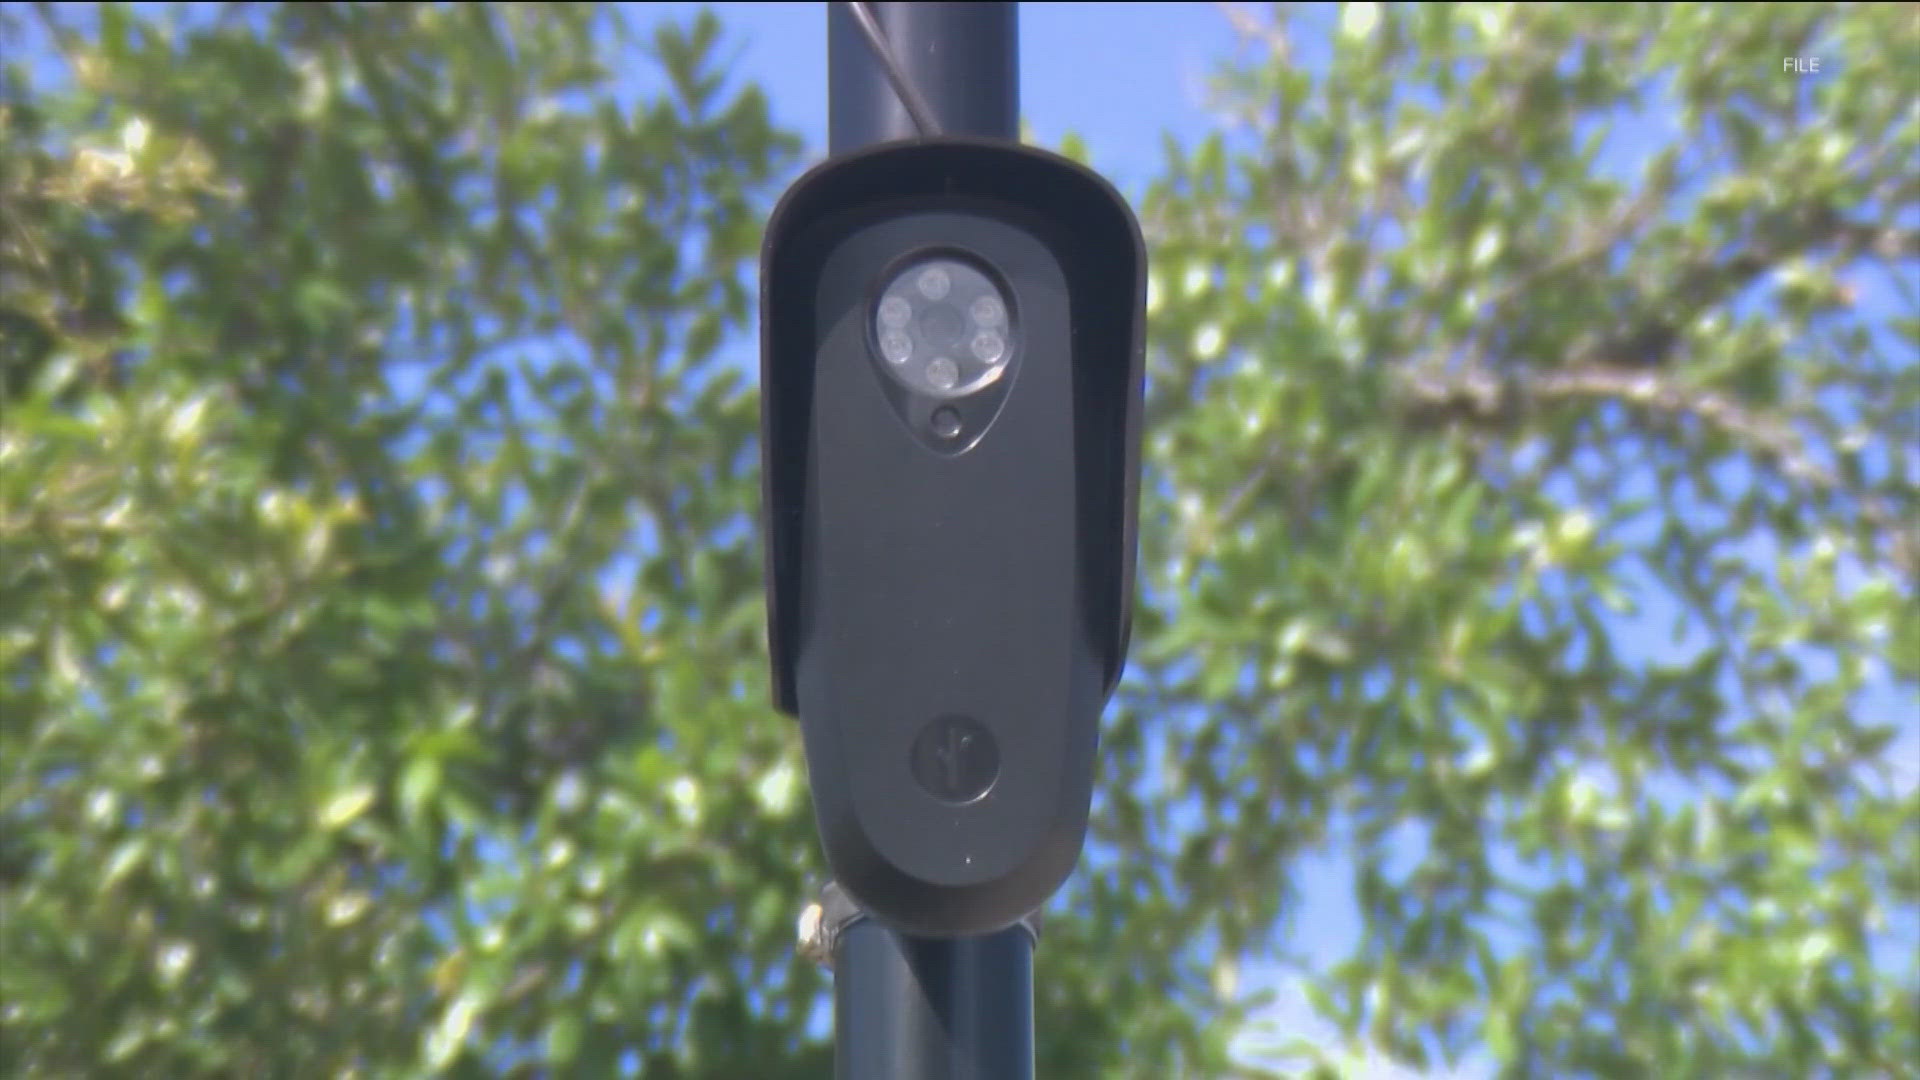 About 20 license plate readers have already been installed across the city.